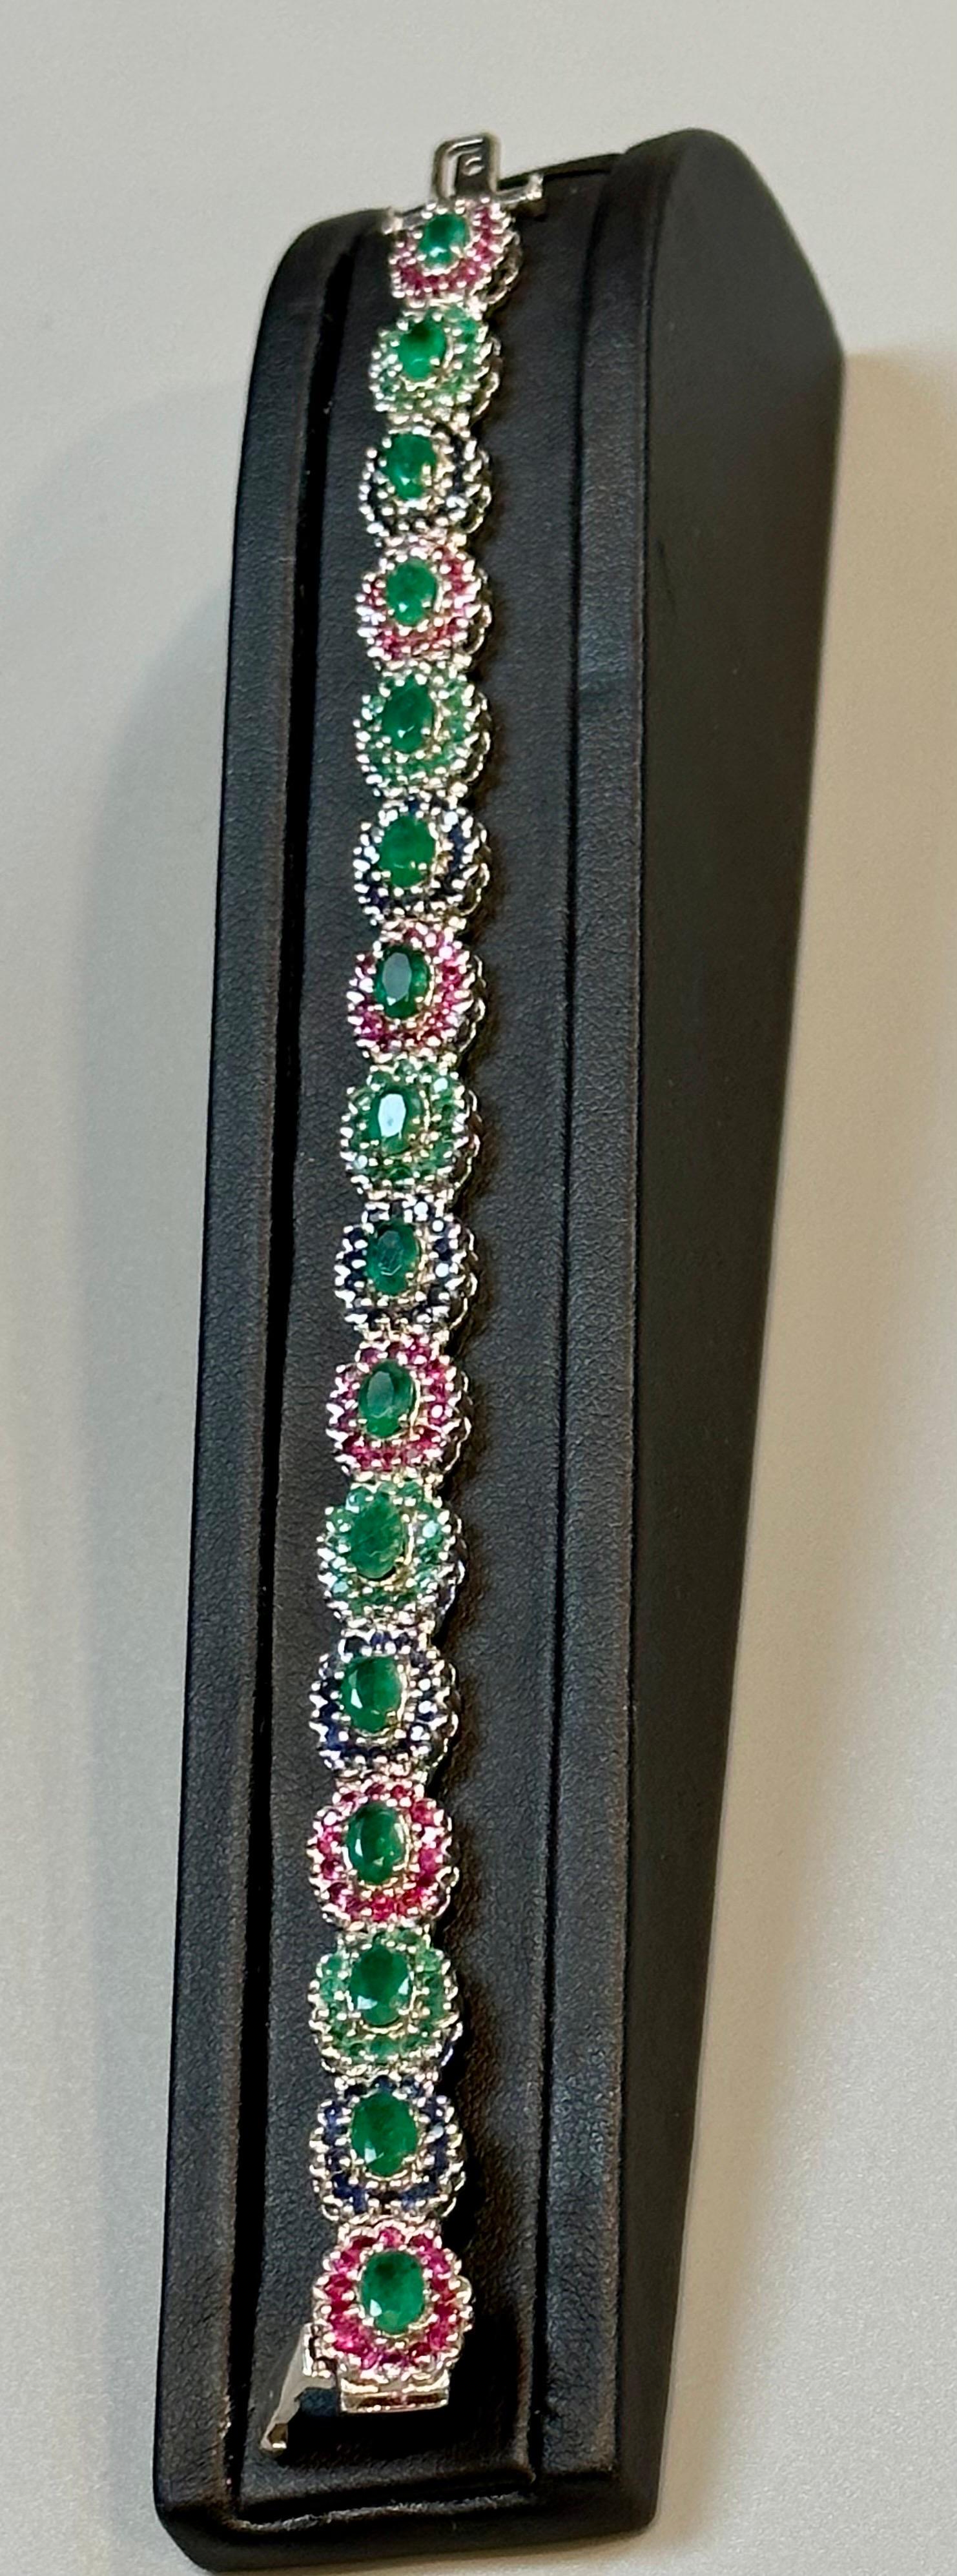 8 Ct Oval Cut Emerald & Ruby & Sapphire Tennis Bracelet 14 Kt White Gold 25.5Gm For Sale 1